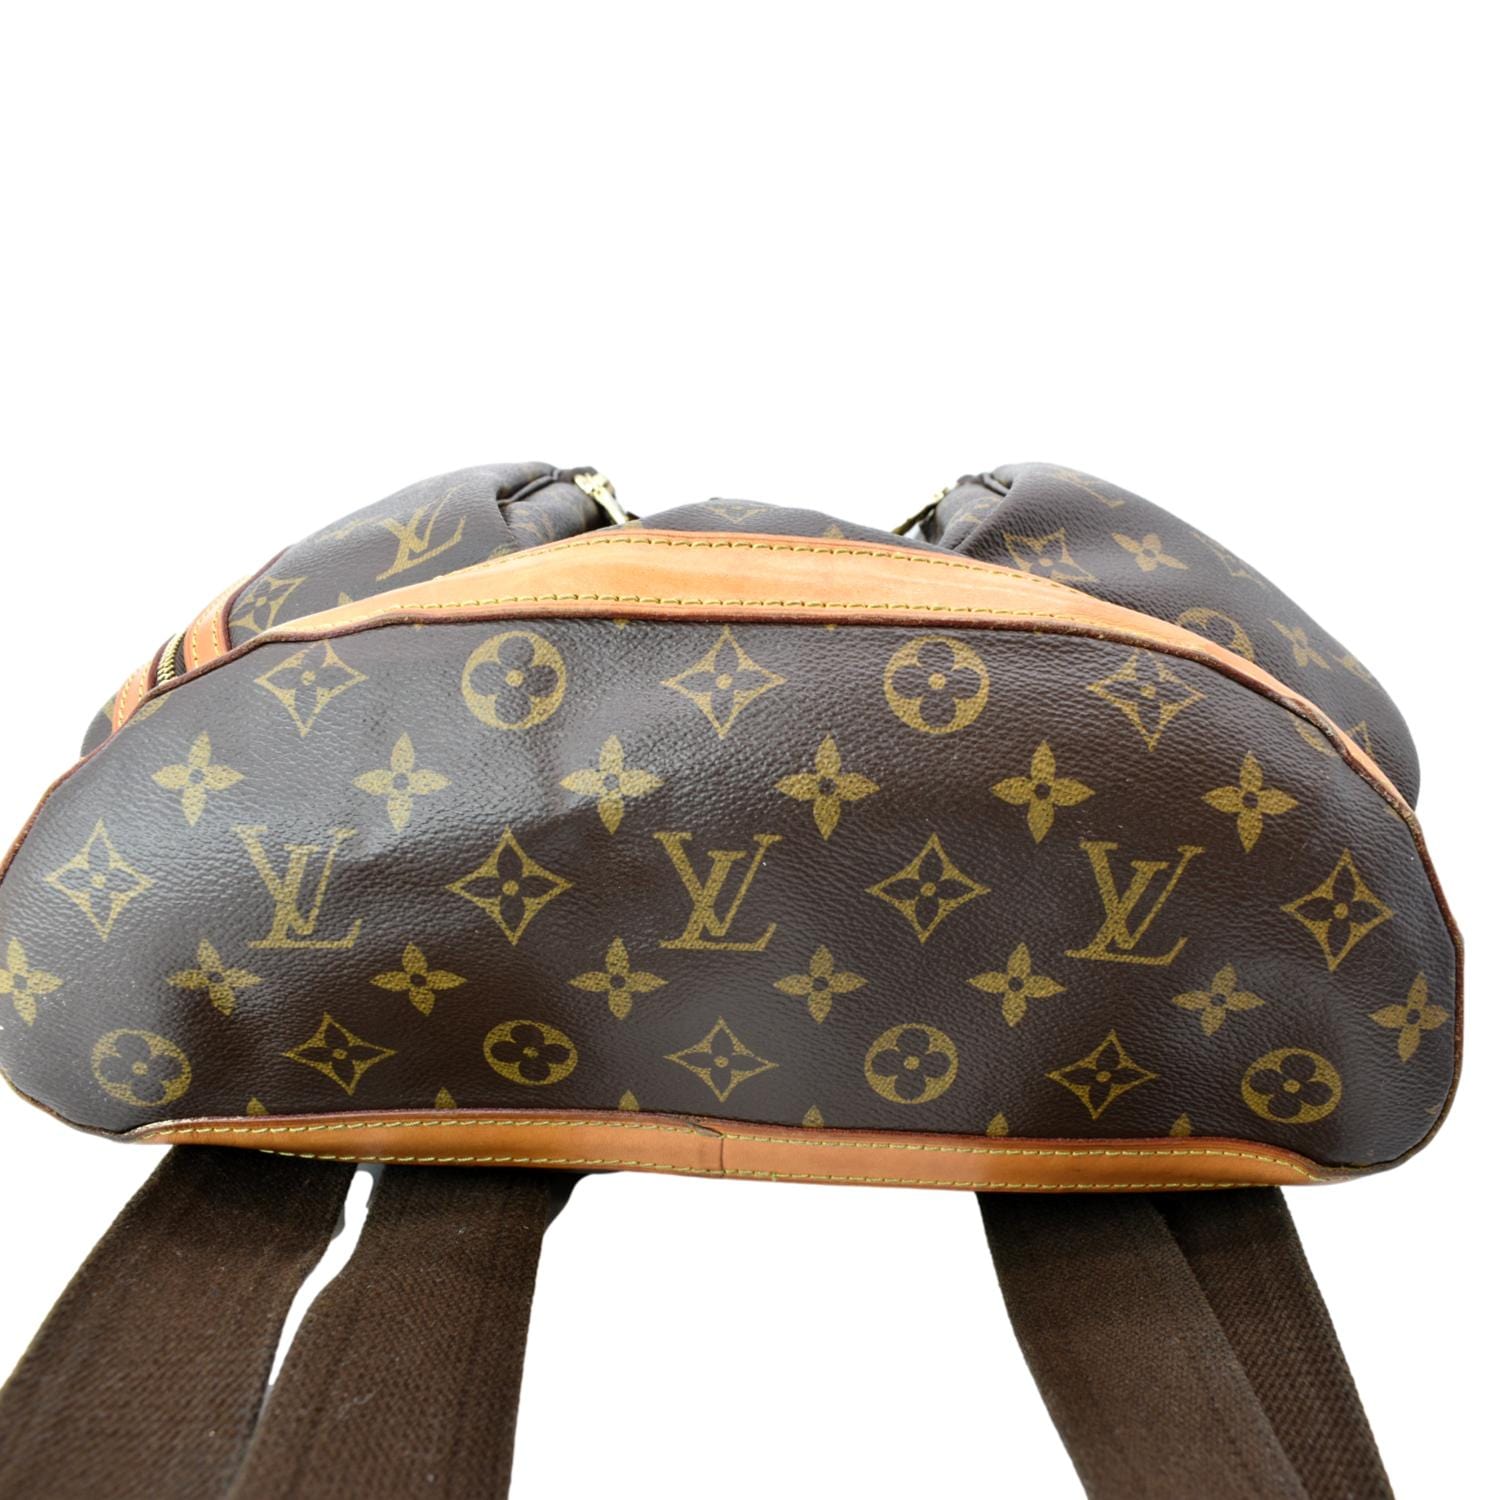 Bosphore backpack leather backpack Louis Vuitton Brown in Leather - 35511447